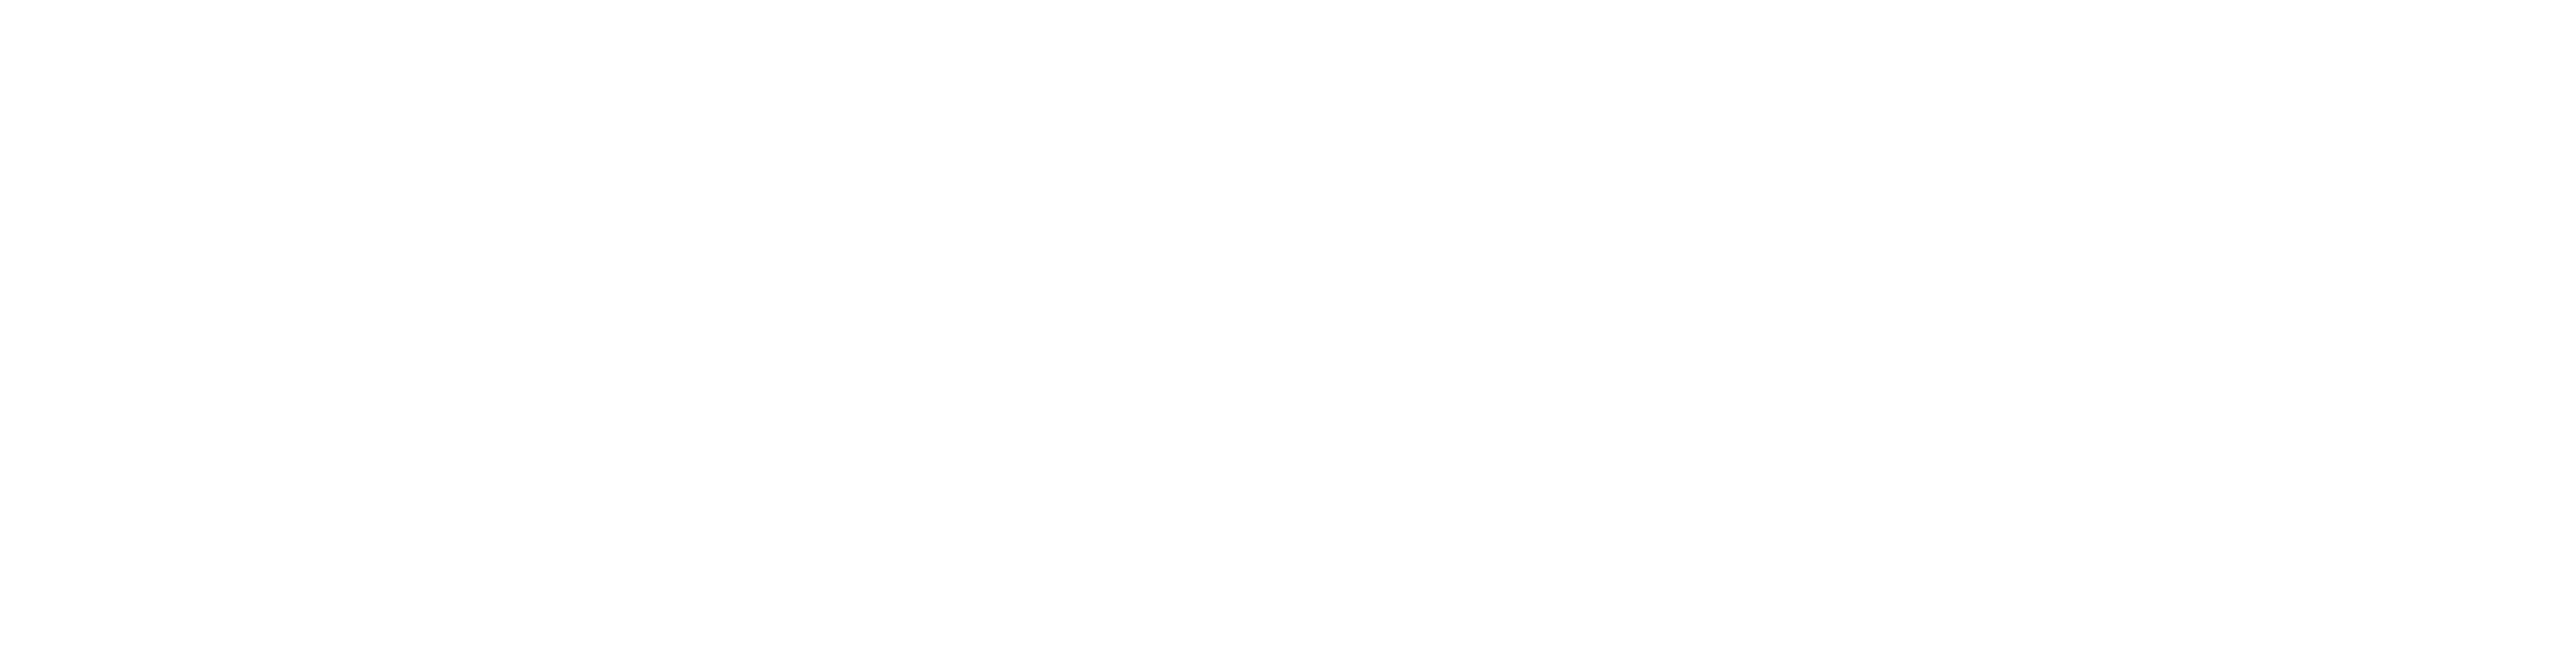 Commercial.Capital